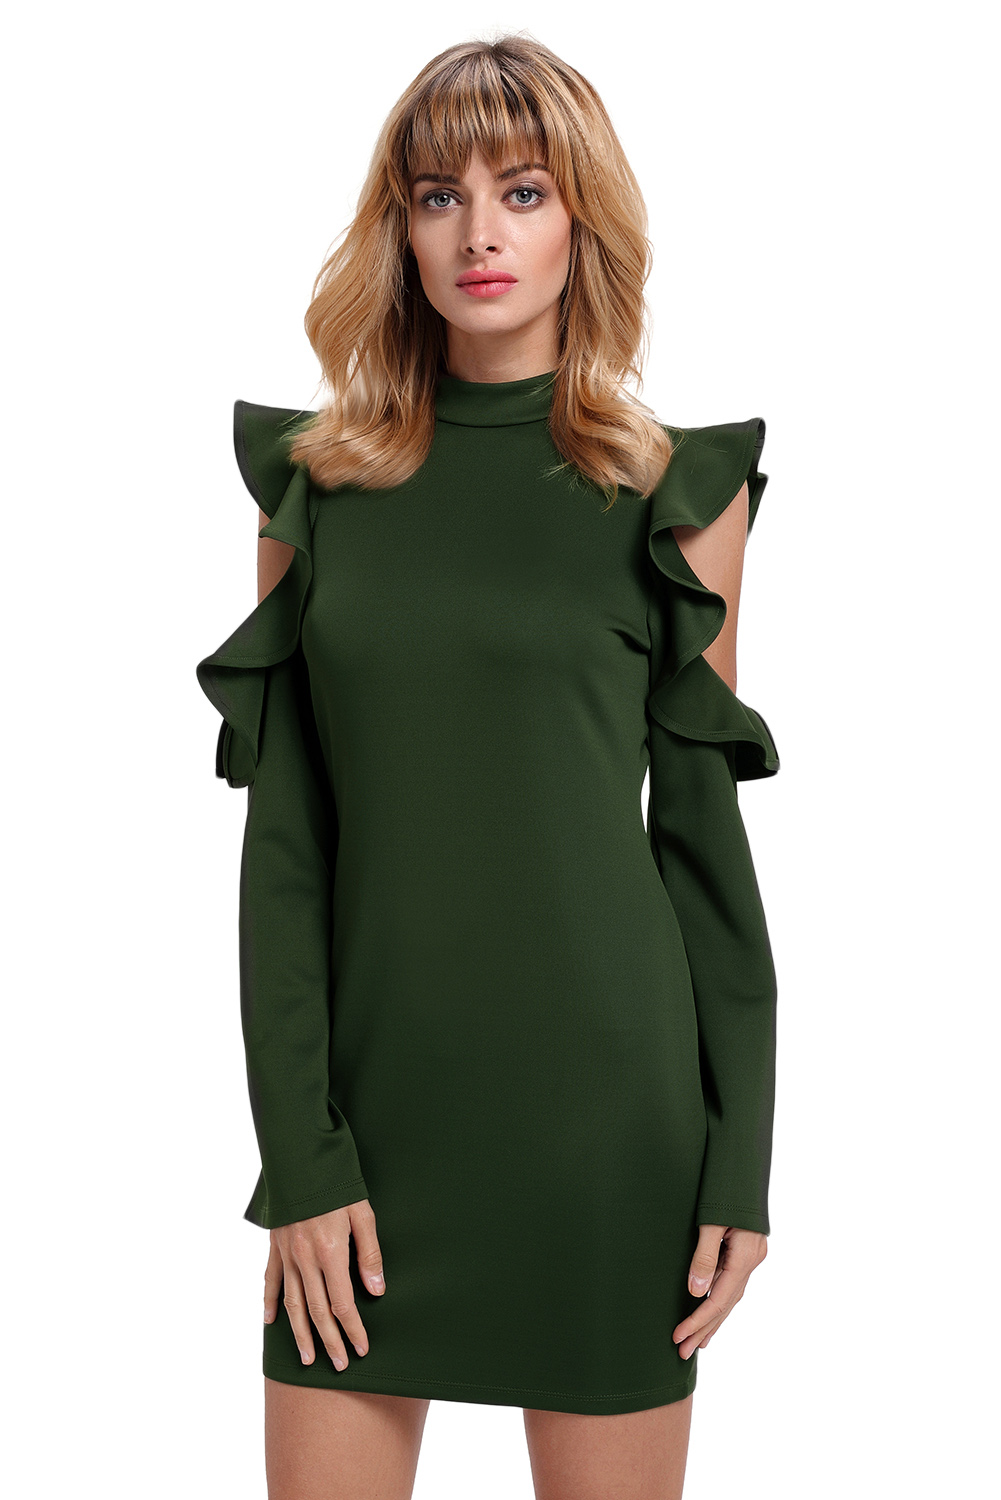 BY220150-9 Army Green Cold Shoulder Ruffle Long Sleeve Bodycon Dress